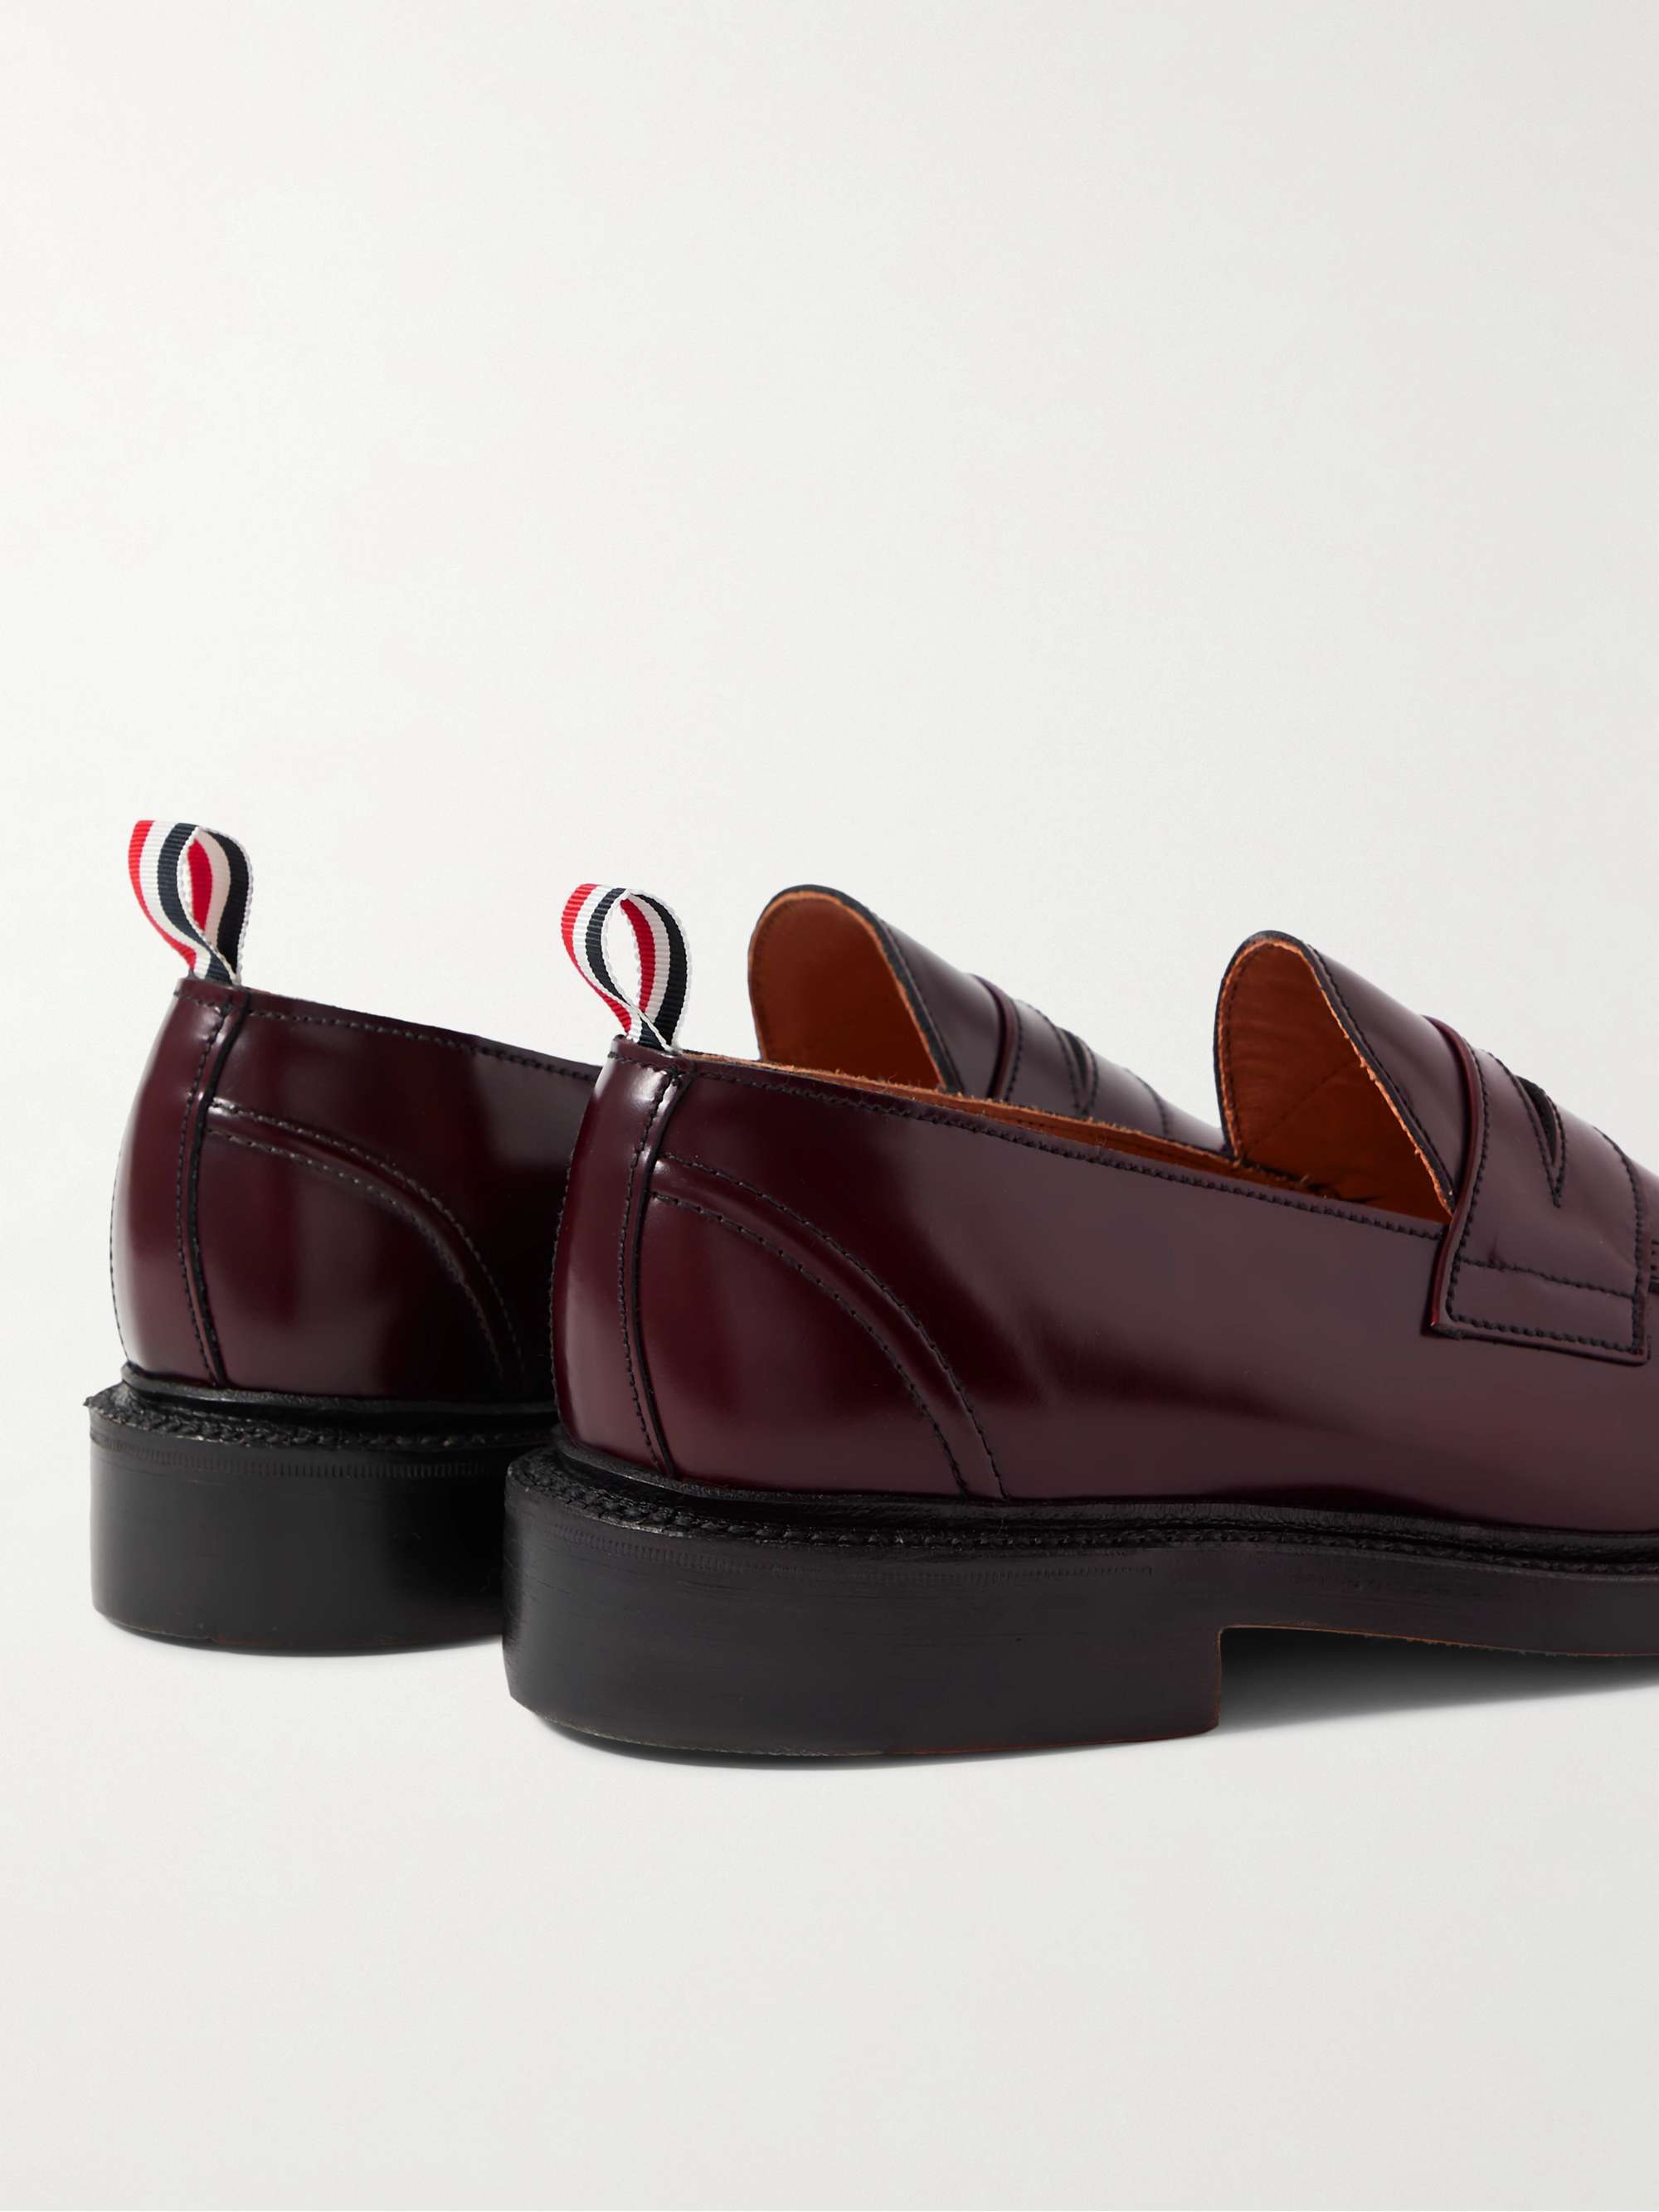 THOM BROWNE Grosgrain-Trimmed Glossed-Leather Penny Loafers